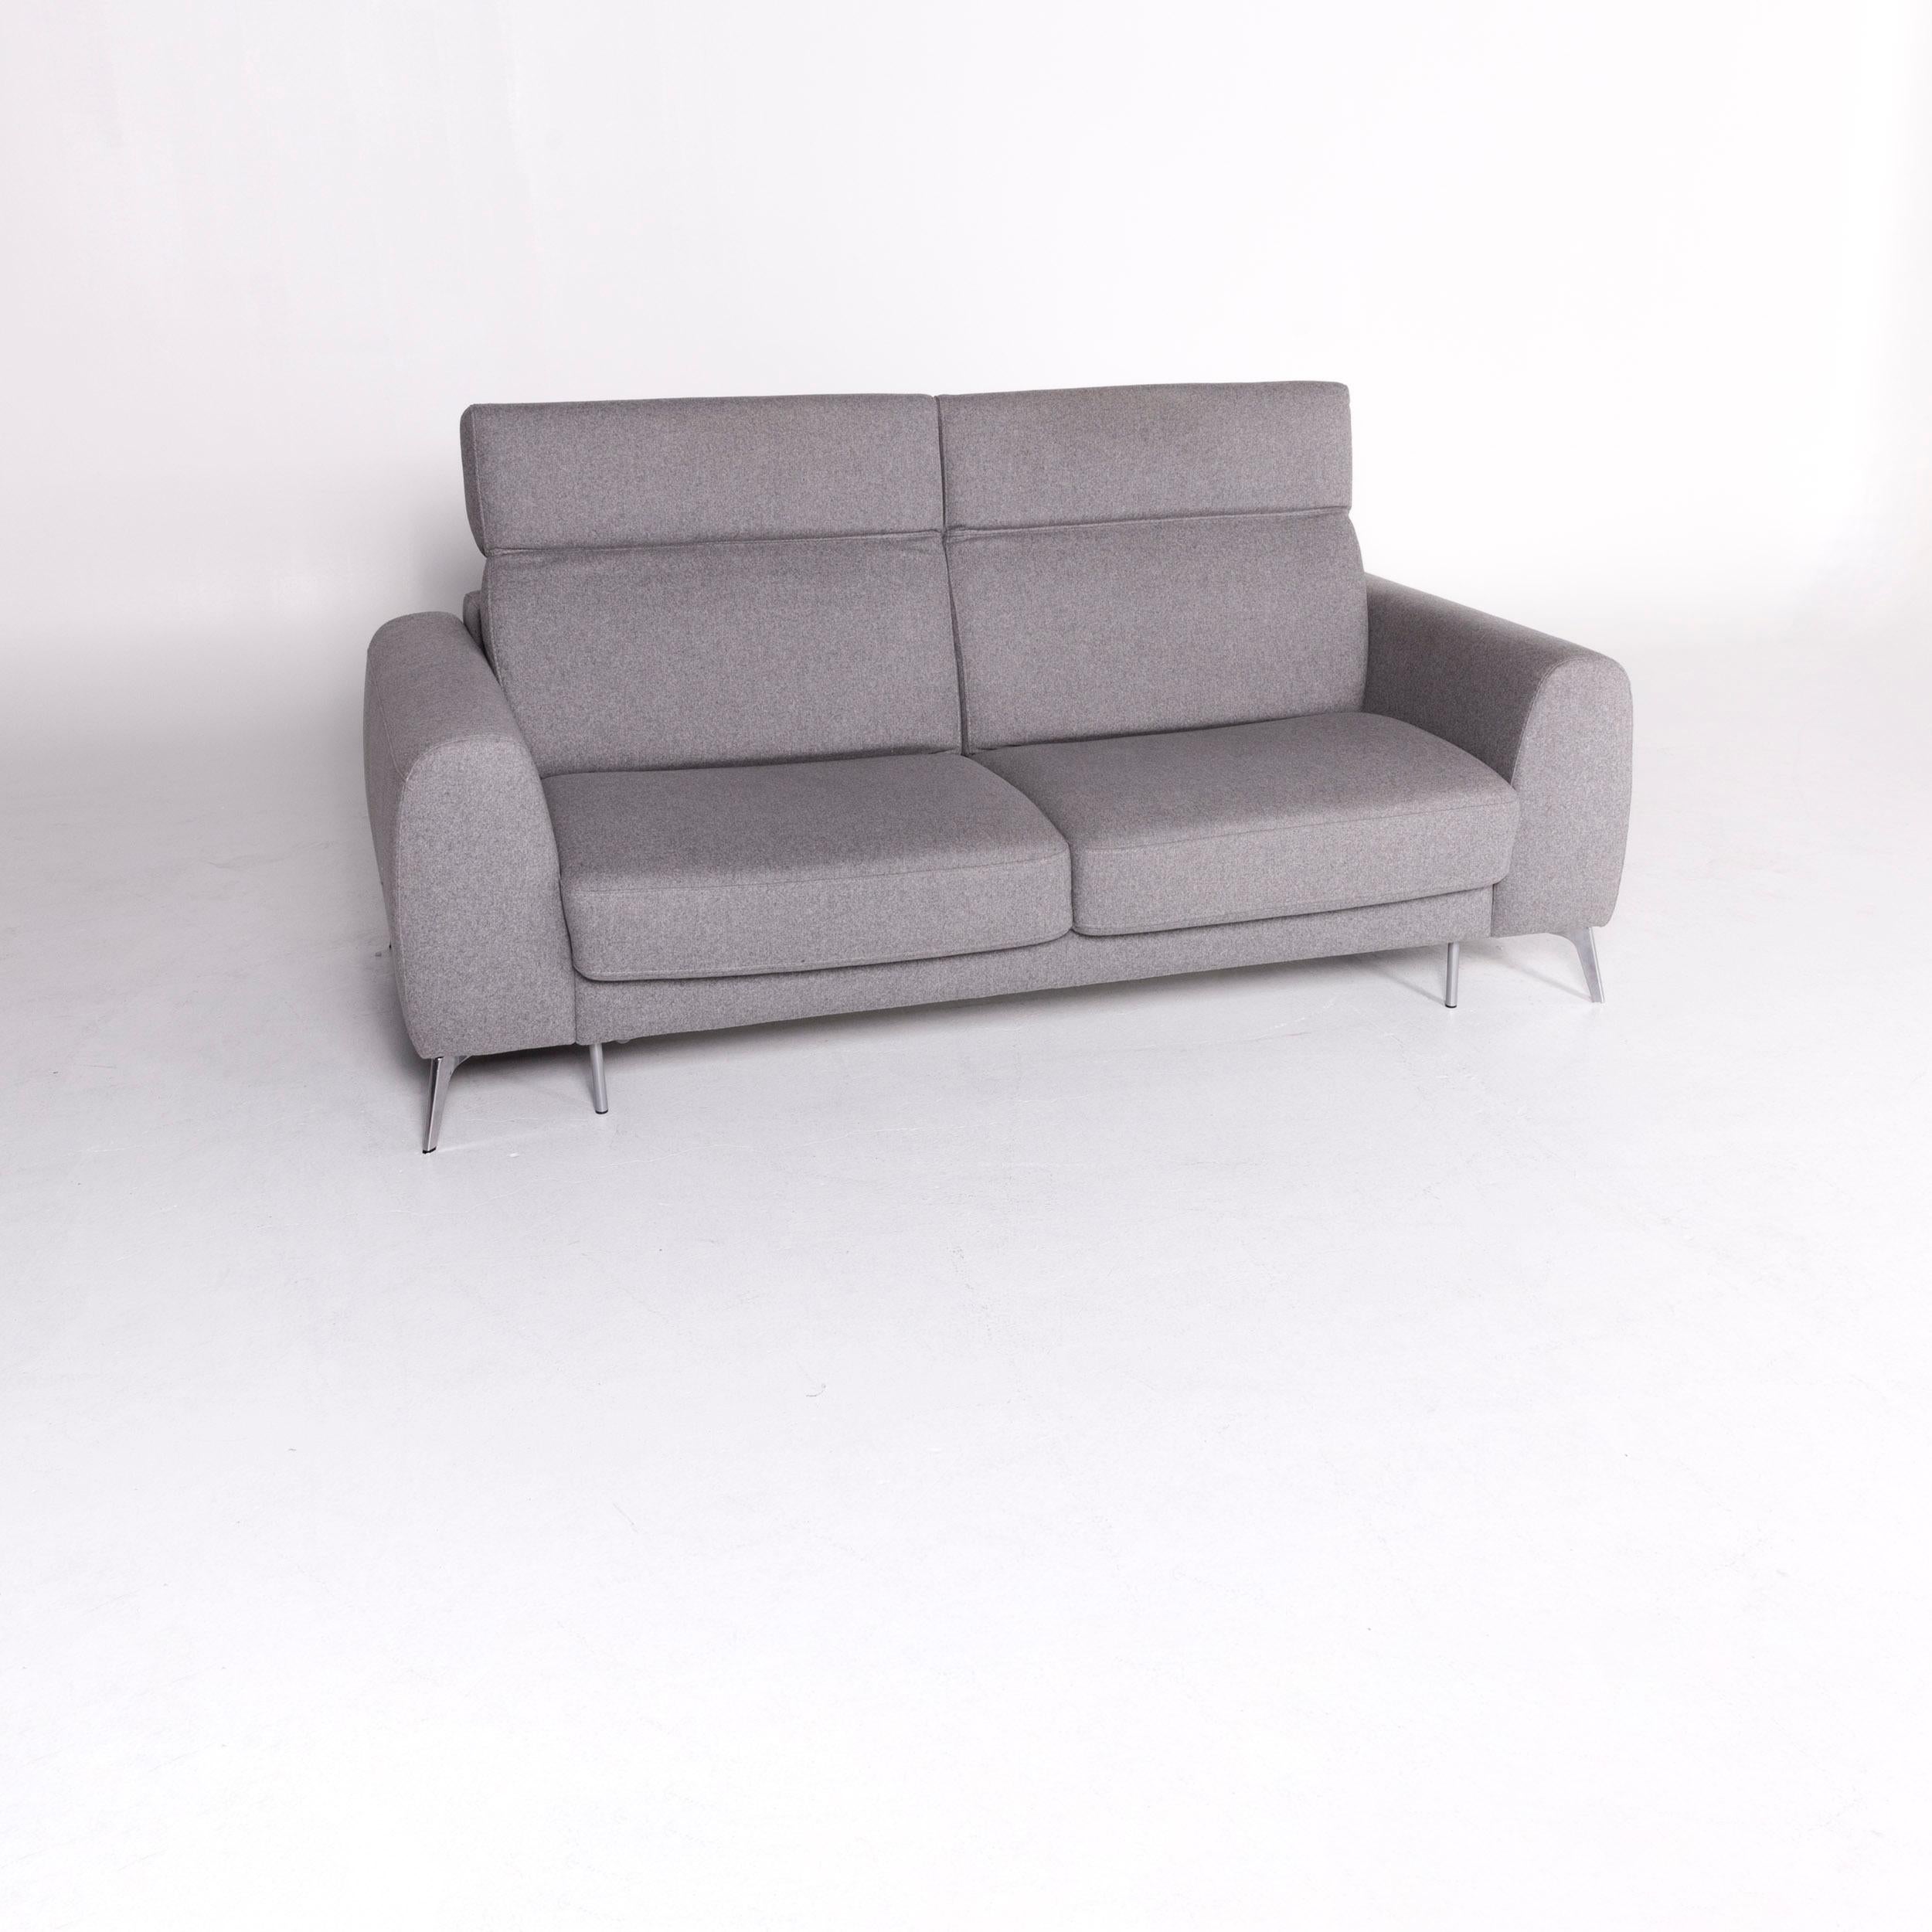 We bring to you a BoConcept Madison designer fabric gray feature sofa bed two-seat couch.

Product measurements in centimeters:

Depth 106
Width 212
Height 85
Seat-height 46
Rest-height 67
Seat-depth 58
Seat-width 160
Back-height 38.
   